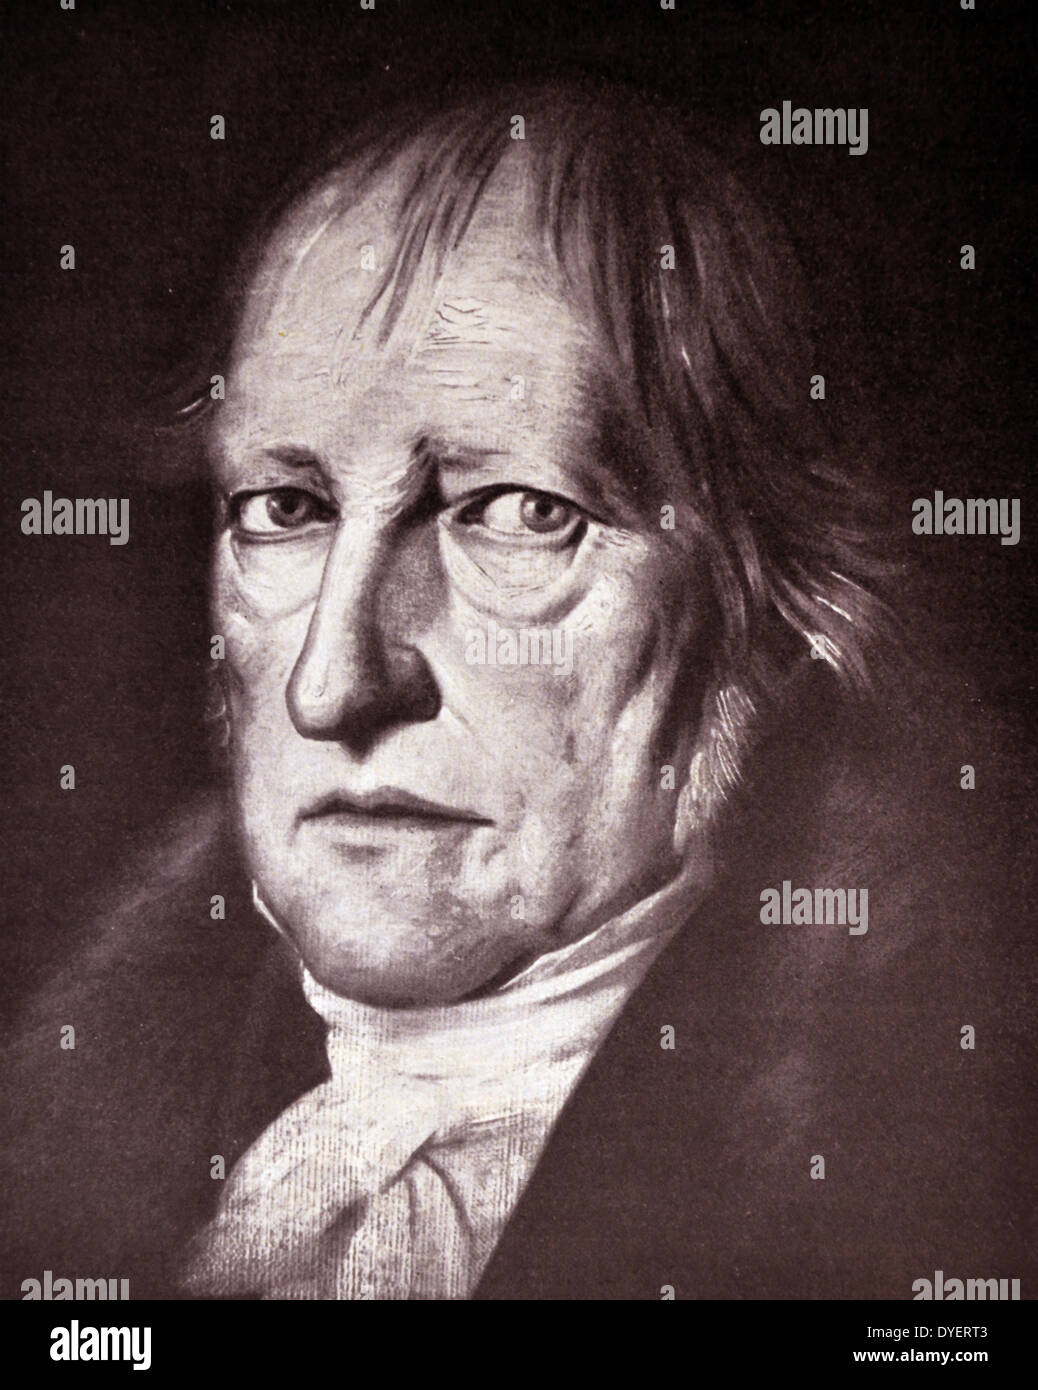 Georg Wilhelm Friedrich Hegel (1770-1831) was a German philosopher, and a major figure in German Idealism. His historicist and idealist account of reality revolutionized European philosophy and was an important precursor to Continental philosophy and Marxism Stock Photo